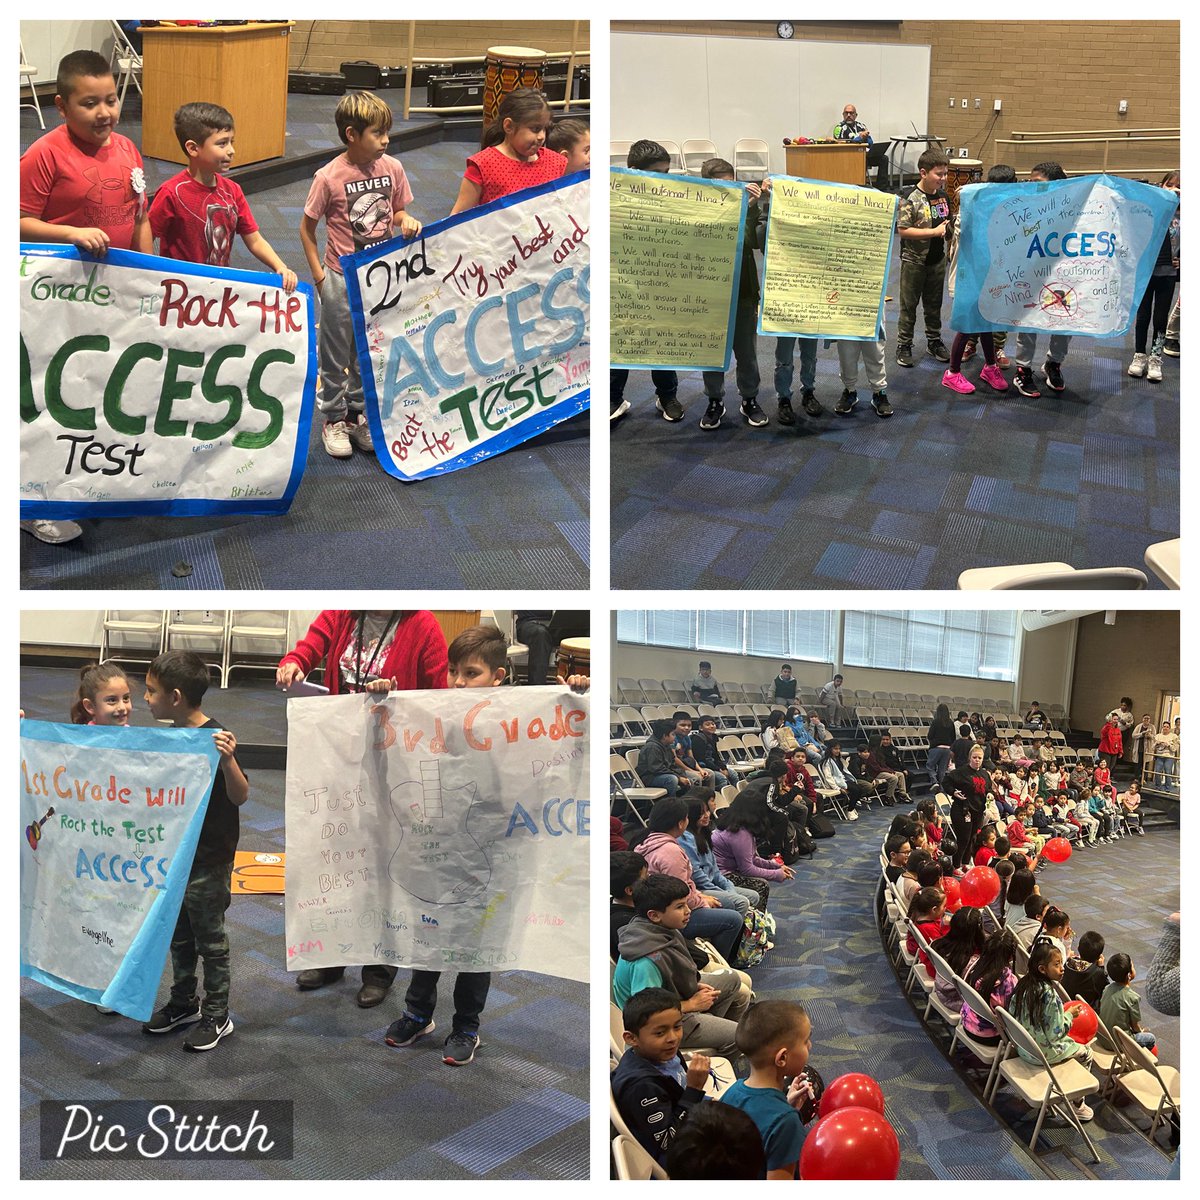 Today we held a pep rally for our students taking the Access test in the next few weeks. We are so proud of their growth and can’t wait to see how they rock the test! @UCPSNC @WalterBickettES @AGHoulihan @Renee_McKinnon1